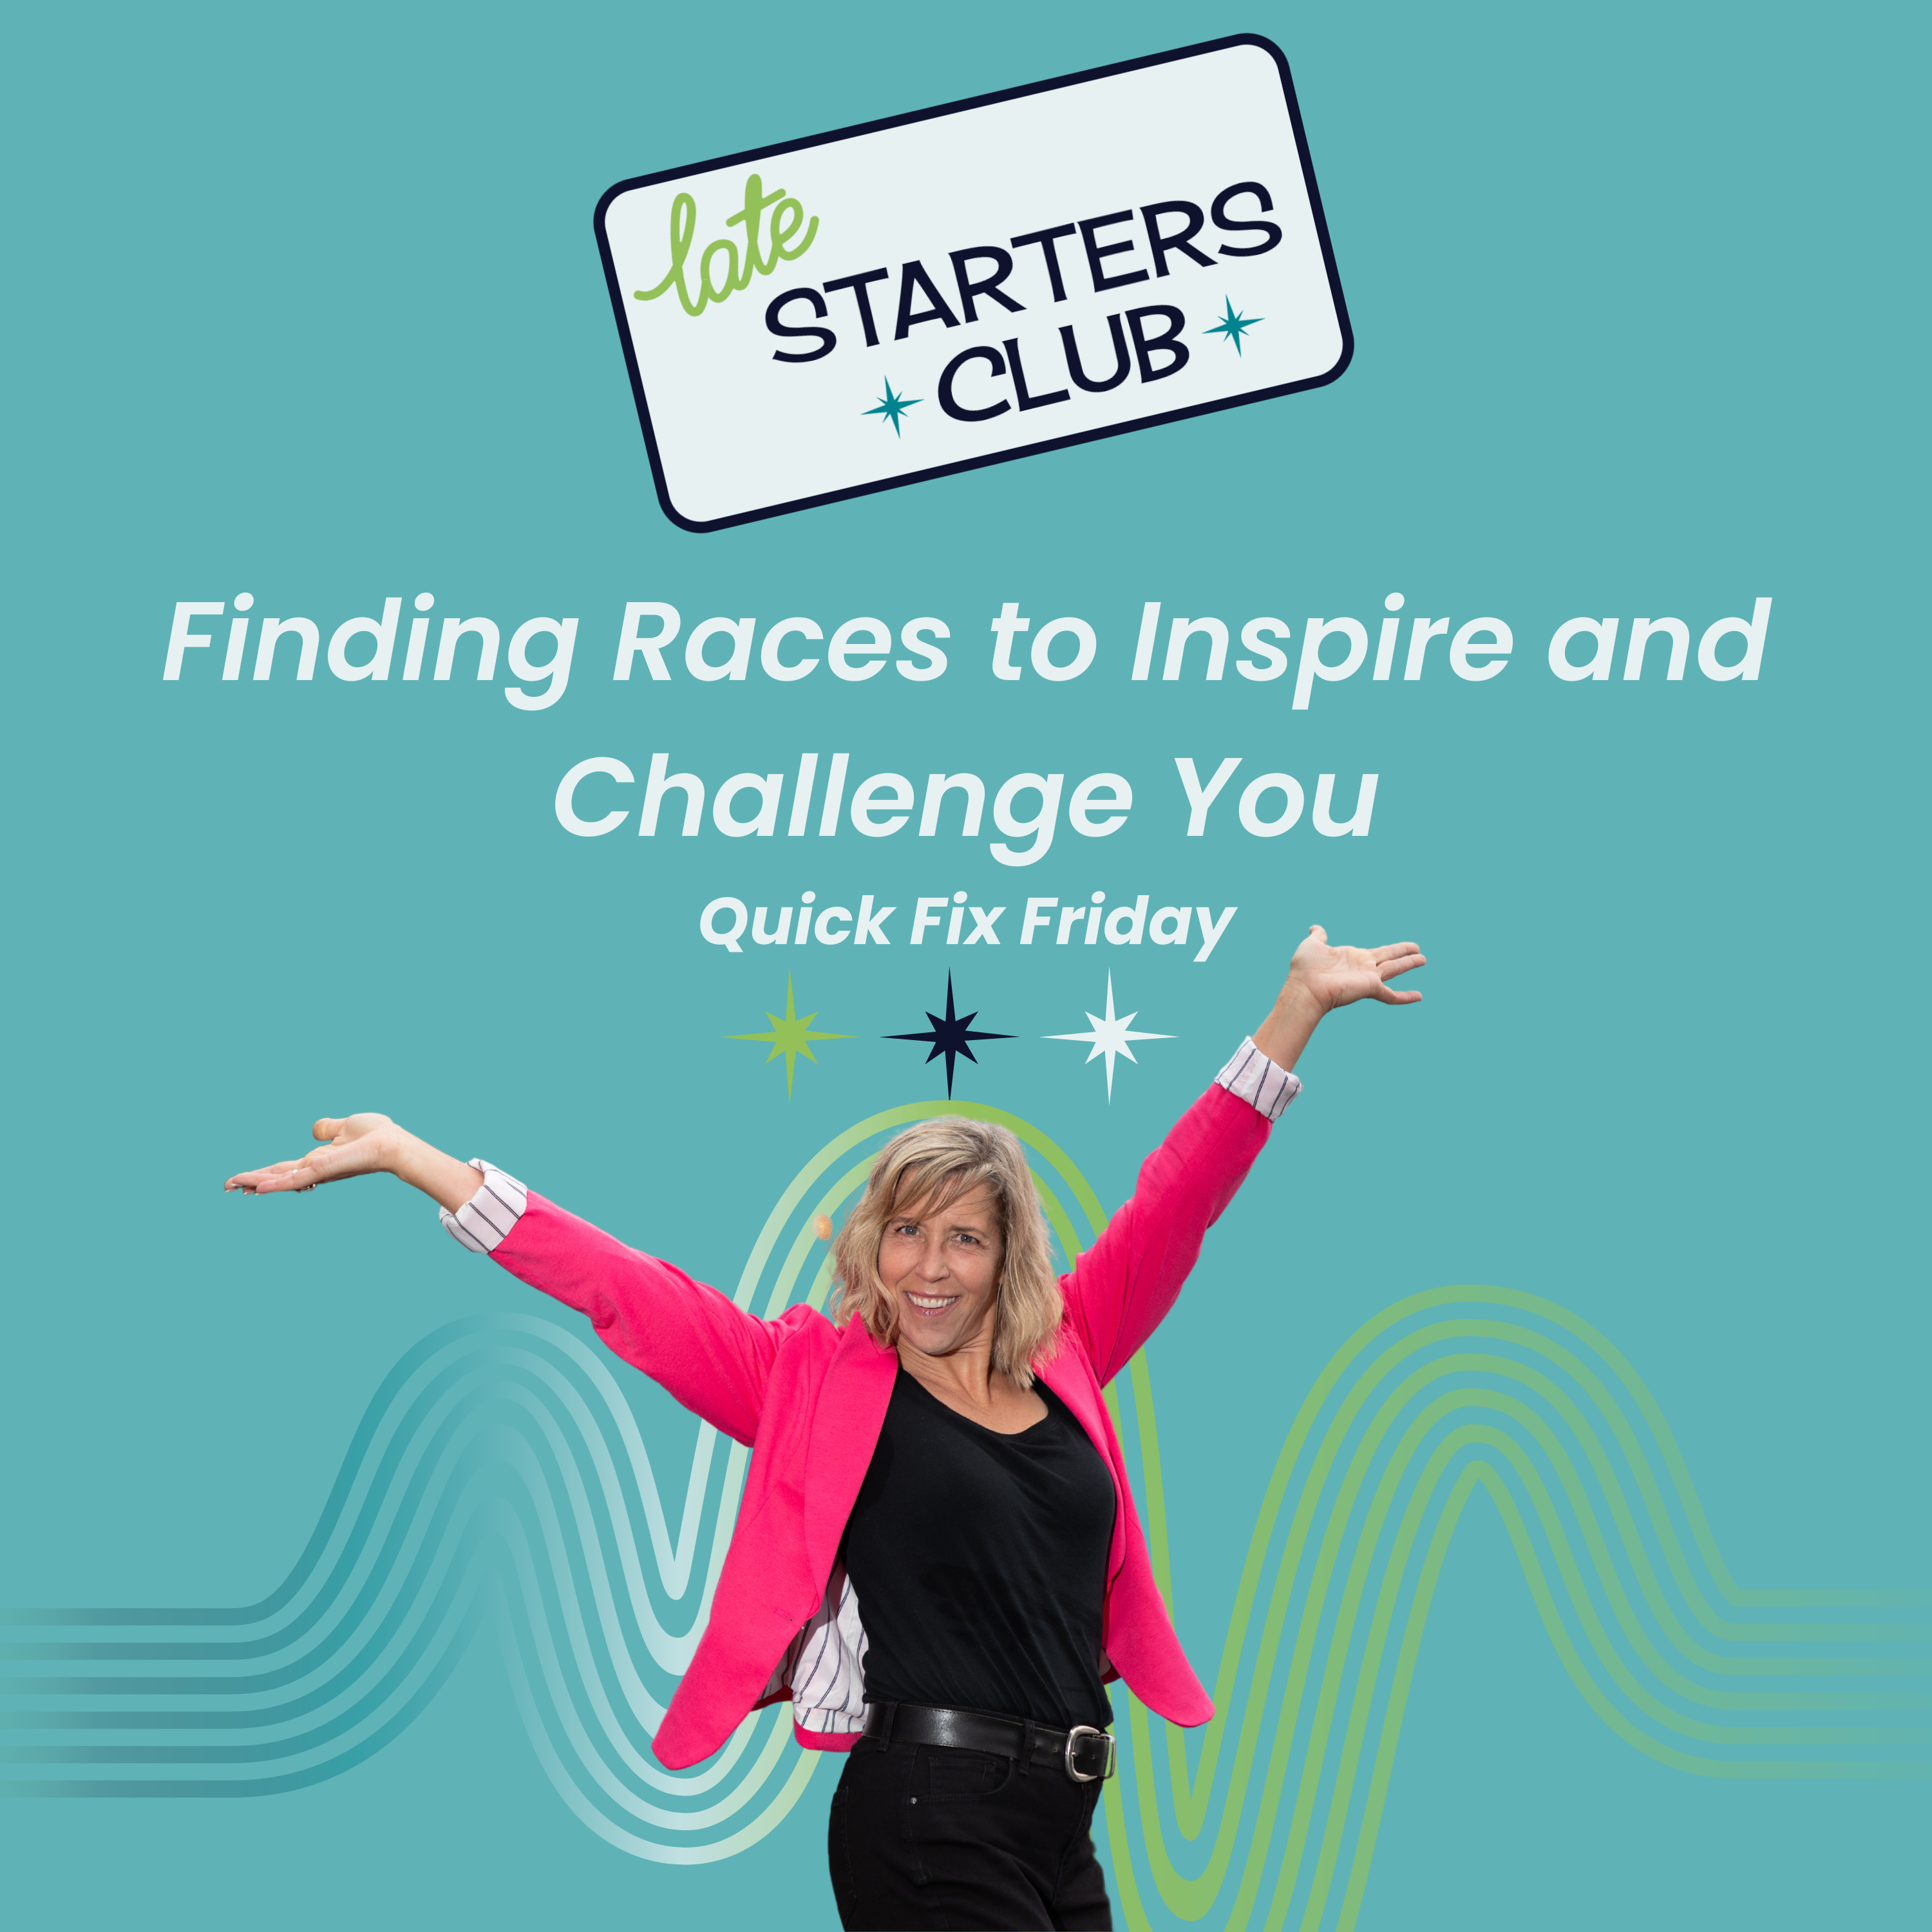 51: Finding Races to Inspire and Challenge You – Quick Fix Friday